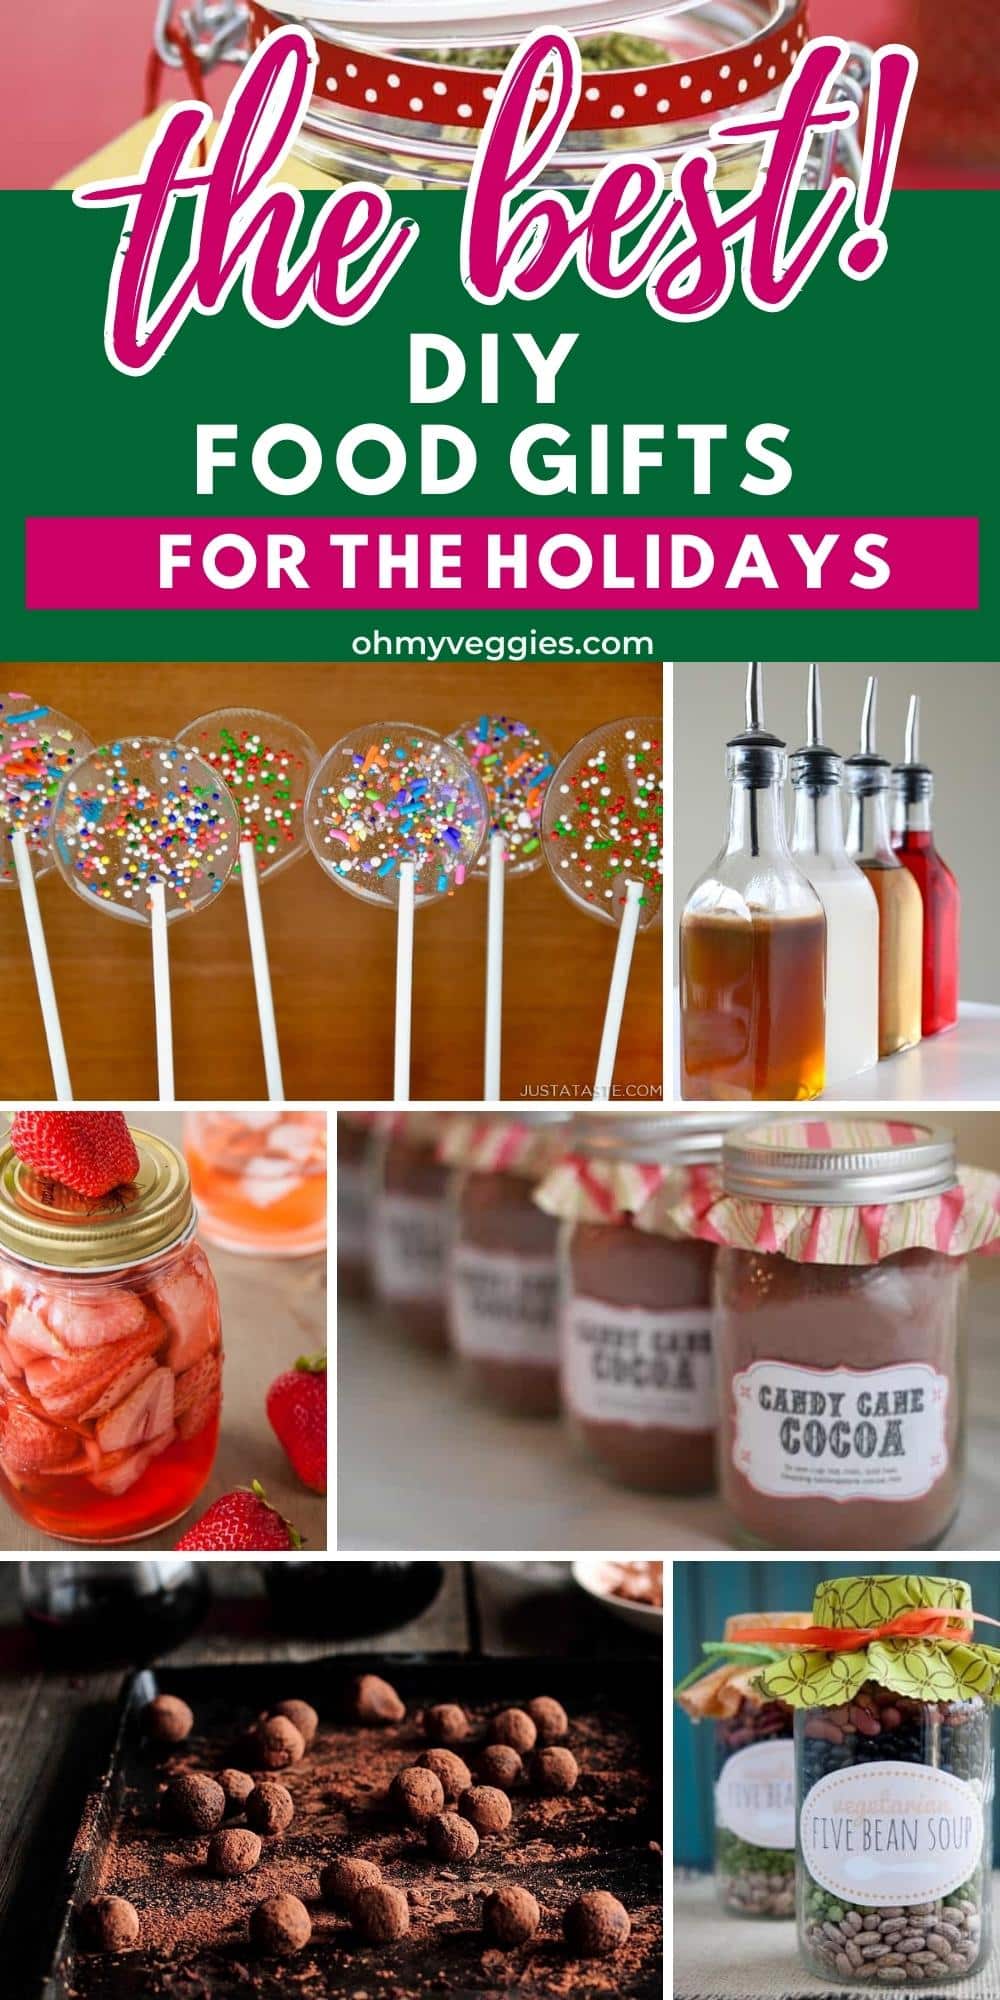 80+ DIY Food Gifts for the Holidays | Oh My Veggies